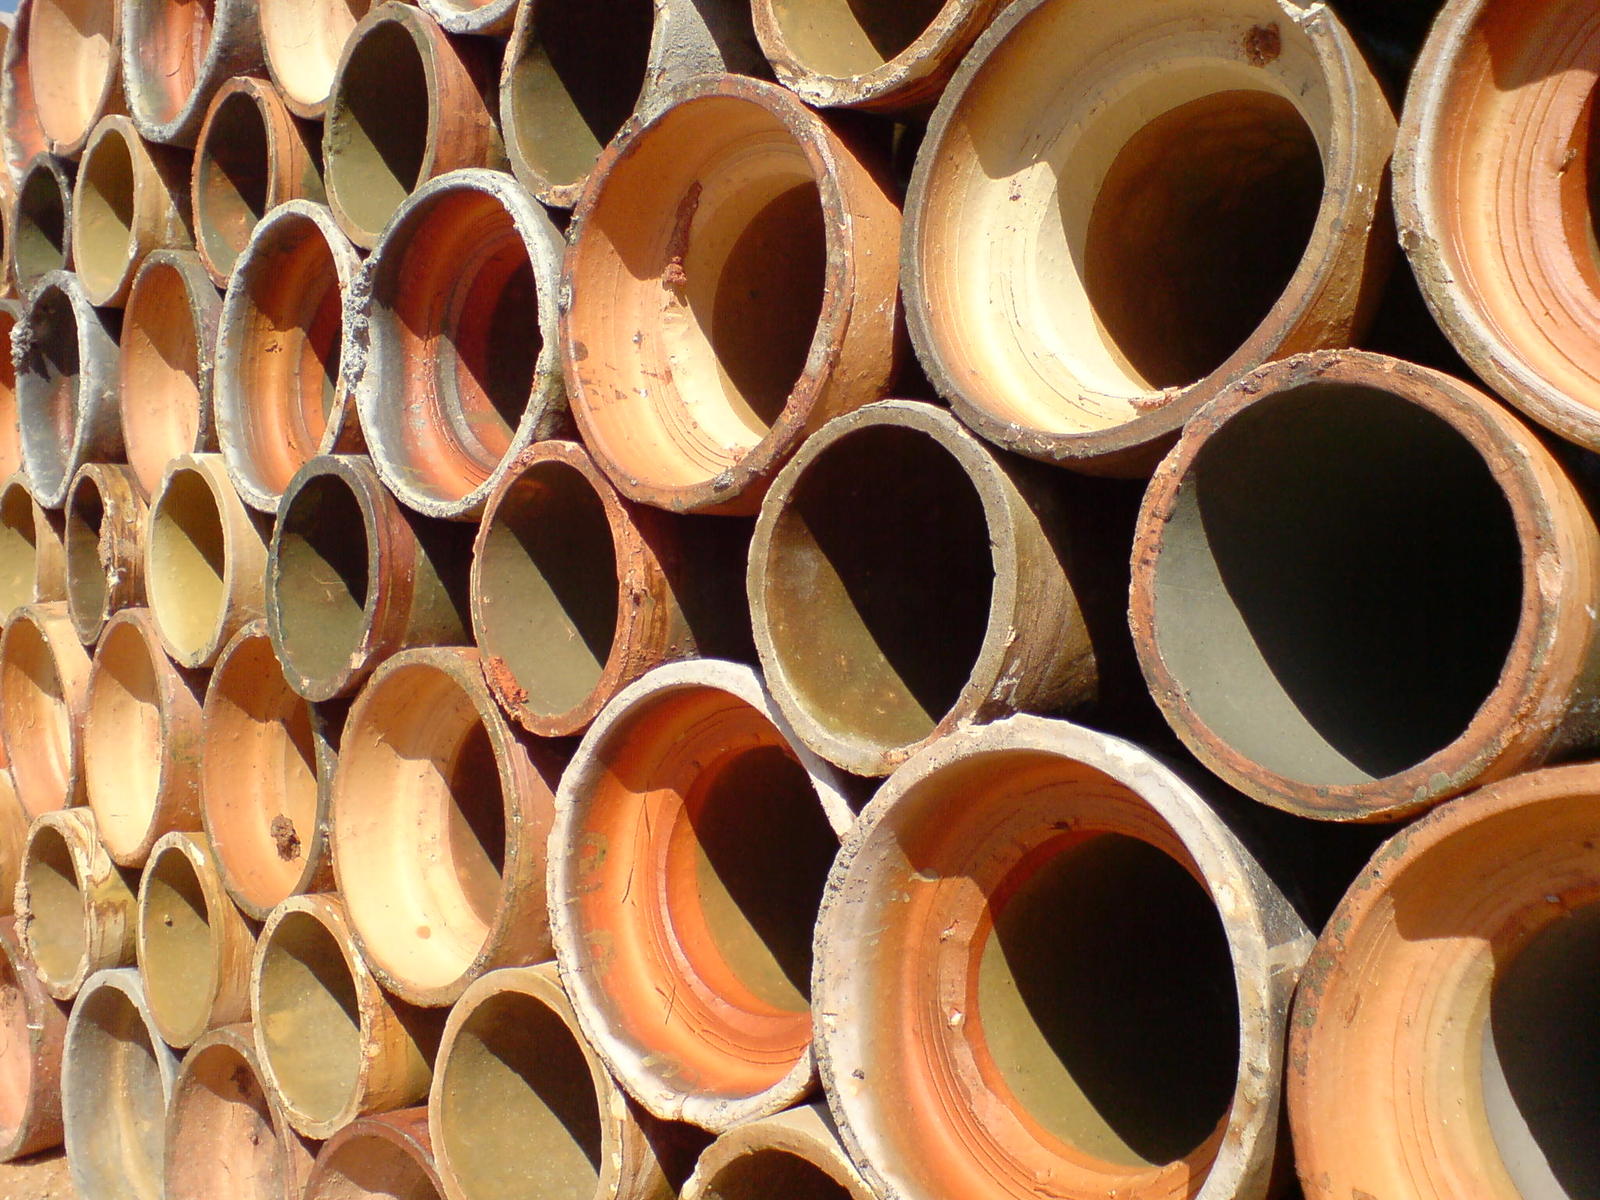 stacks of clay barrels are displayed stacked up